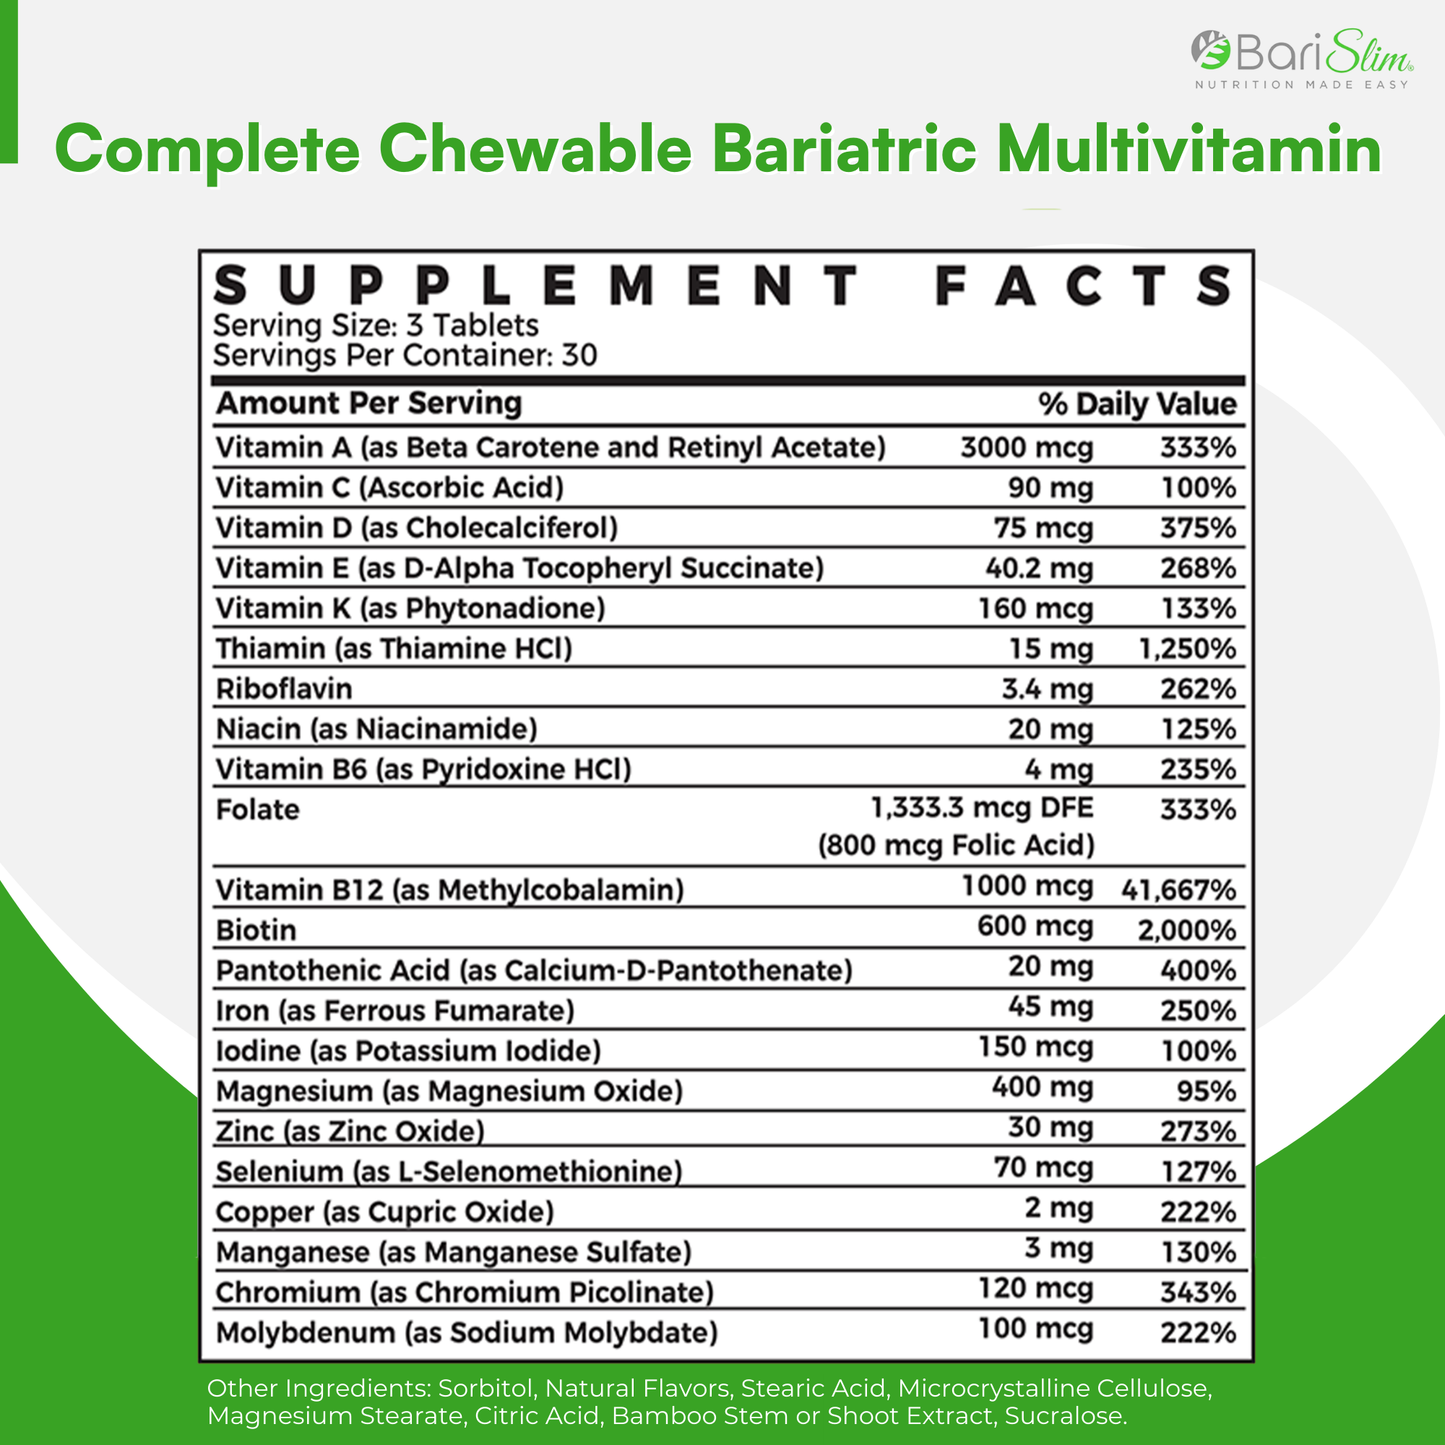 Supplement Facts for bariatric chewable multivitamin